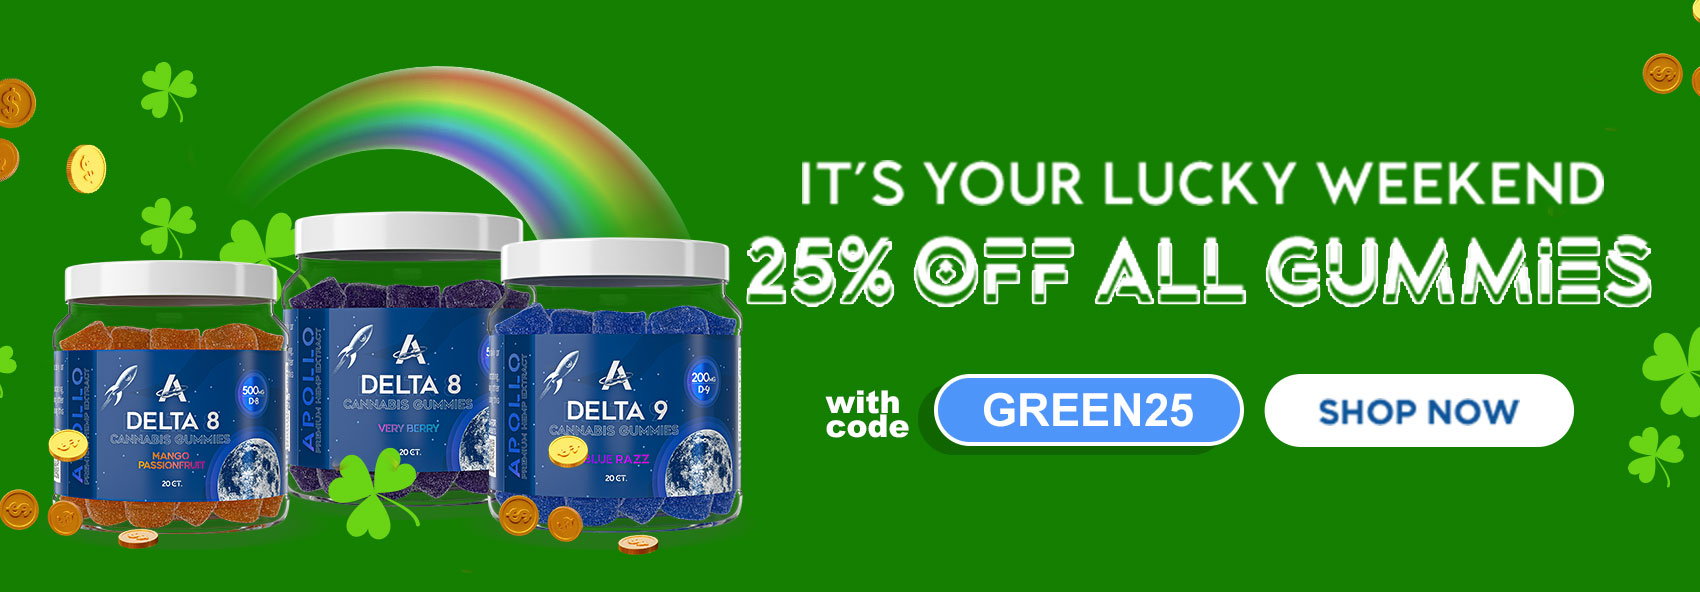 IT´S YOUR LUCKY WEEKEND 25% OFF ALL GUMMIES